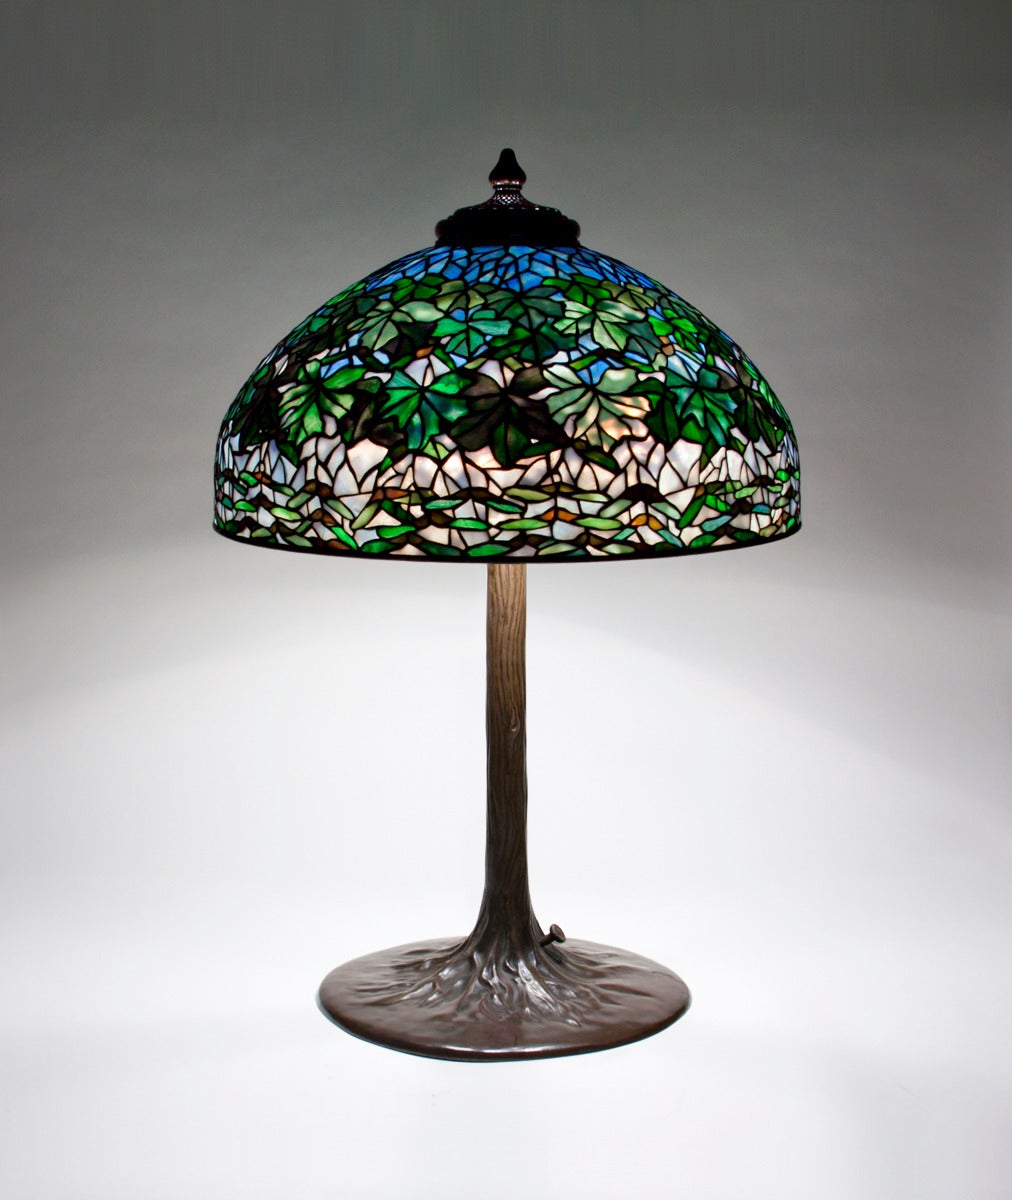 A Tiffany Studios leaded glass and bronze table lamp comprising a 